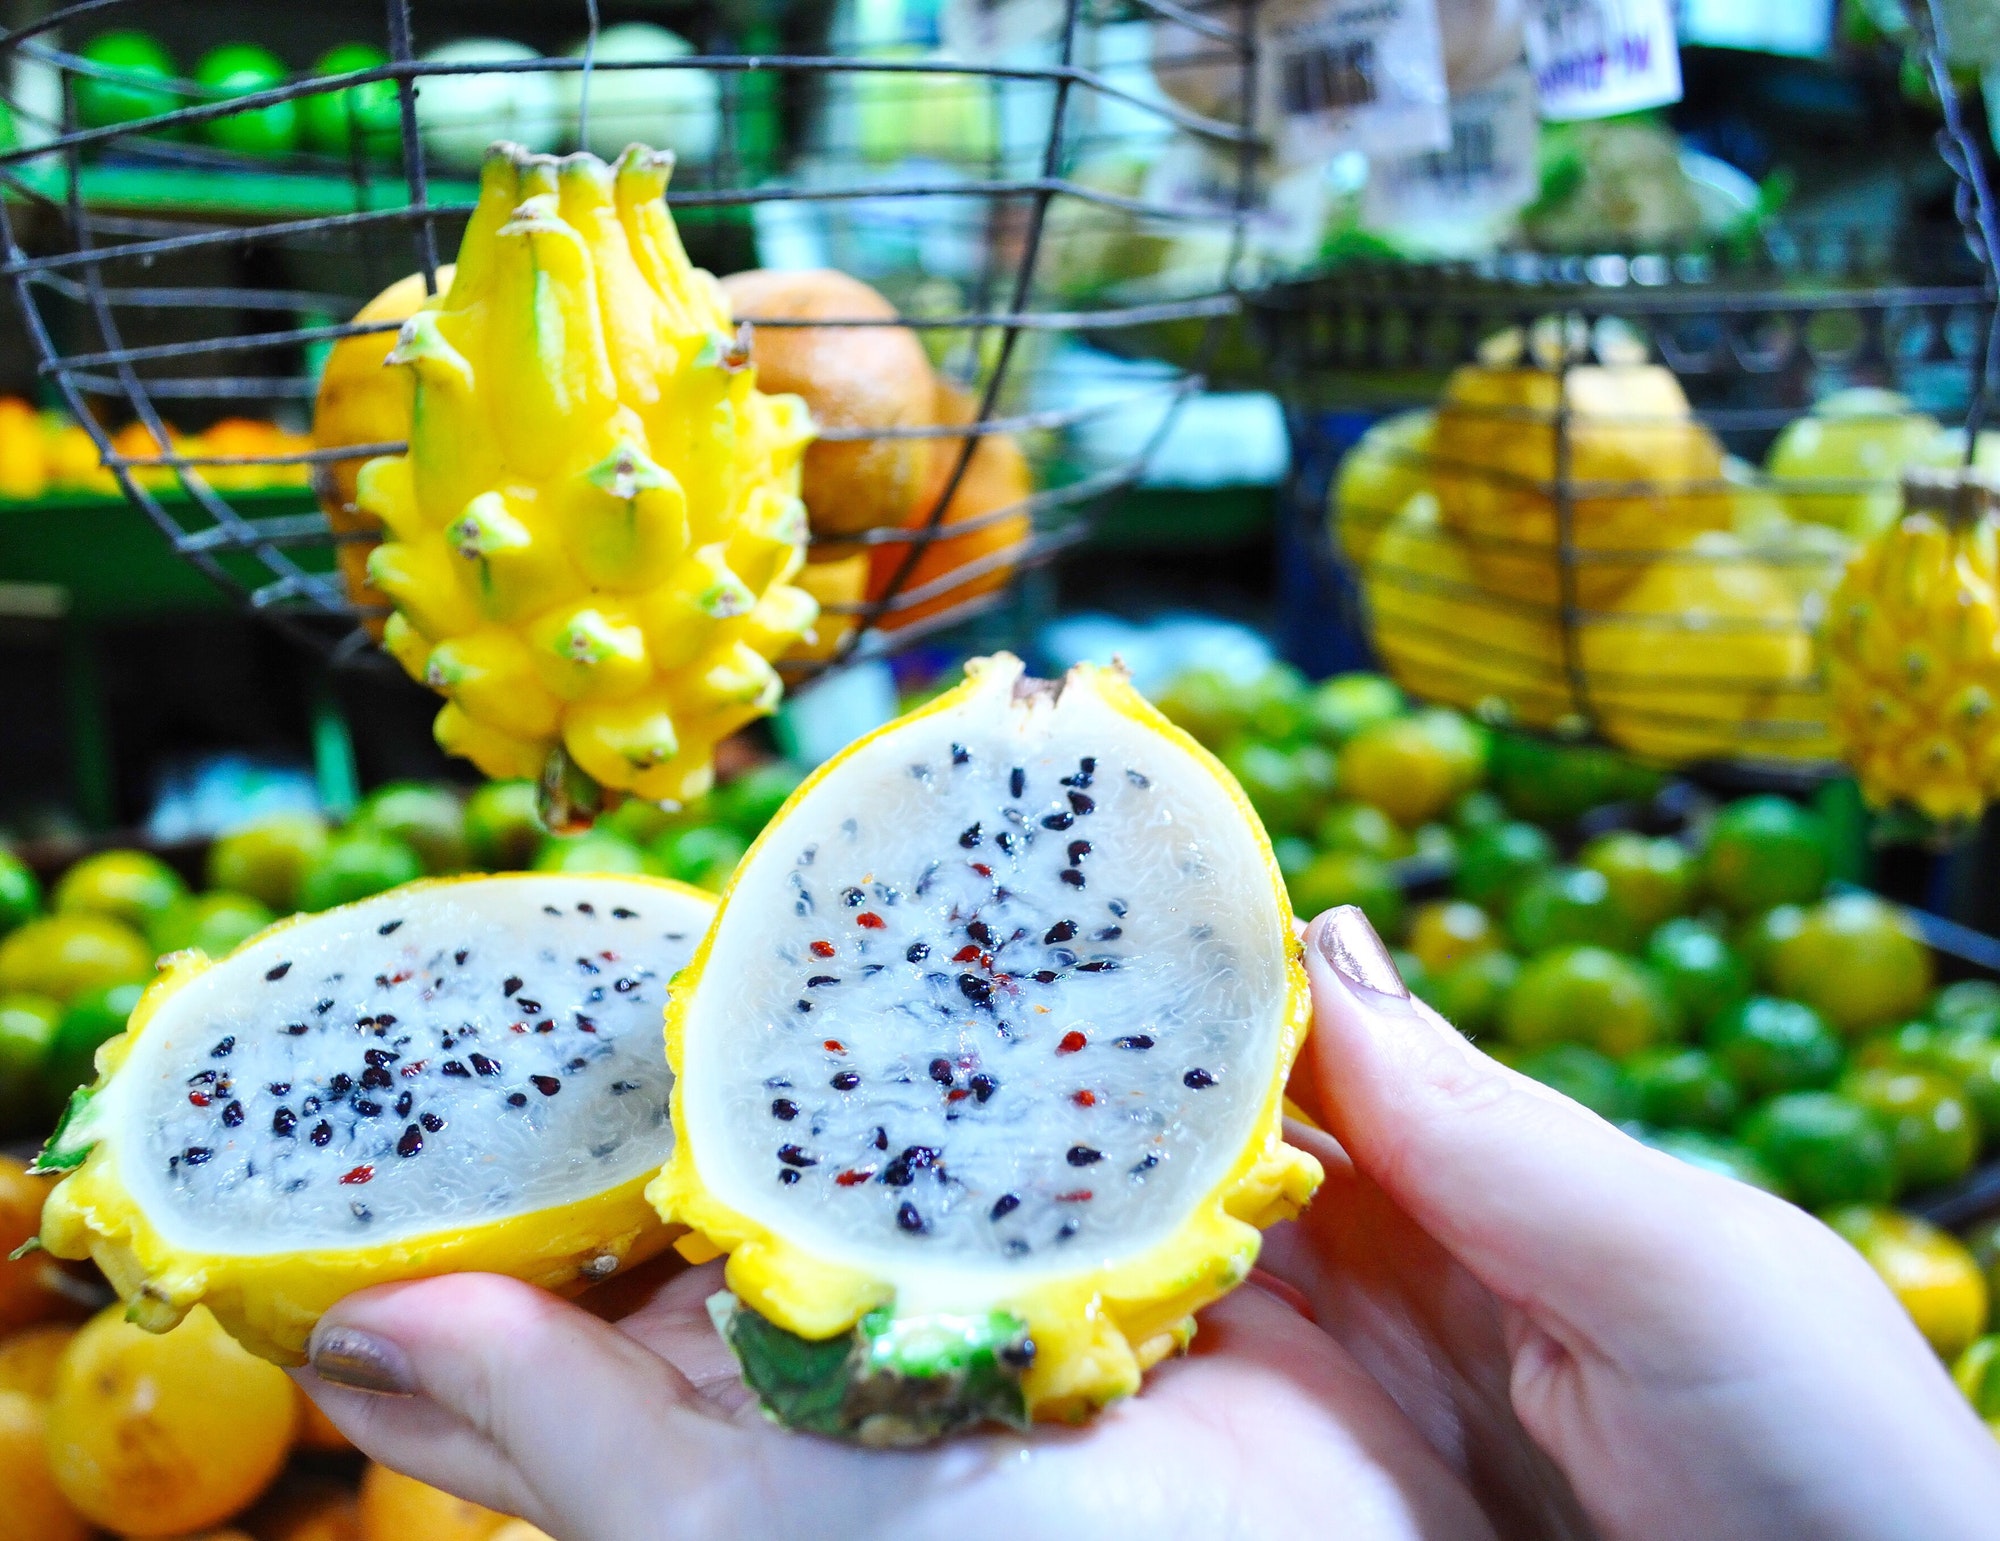 Touring the fruit markets in Colombia, South America. This was our favorite, unique fruit!